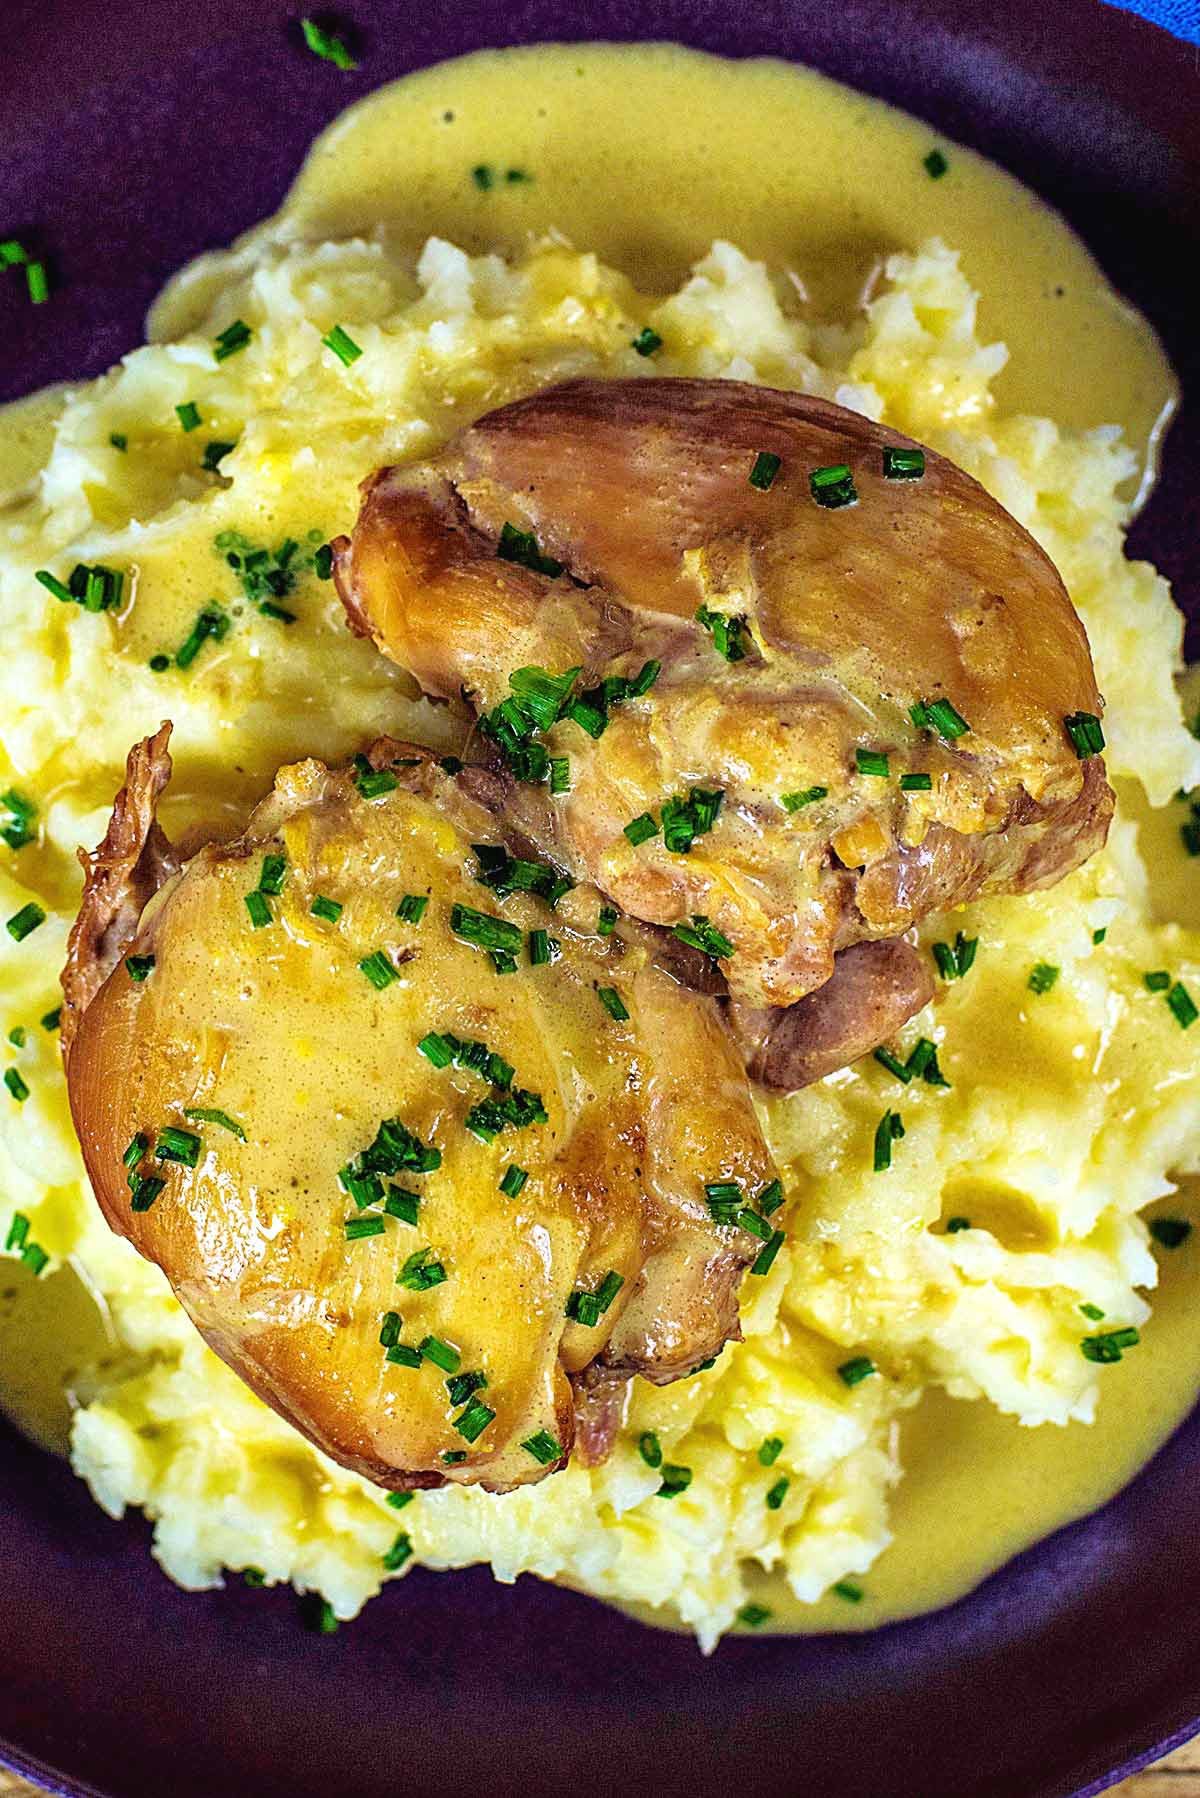 Two cooked chicken thighs on a bed of mashed potato covered in a creamy sauce with chopped chives.